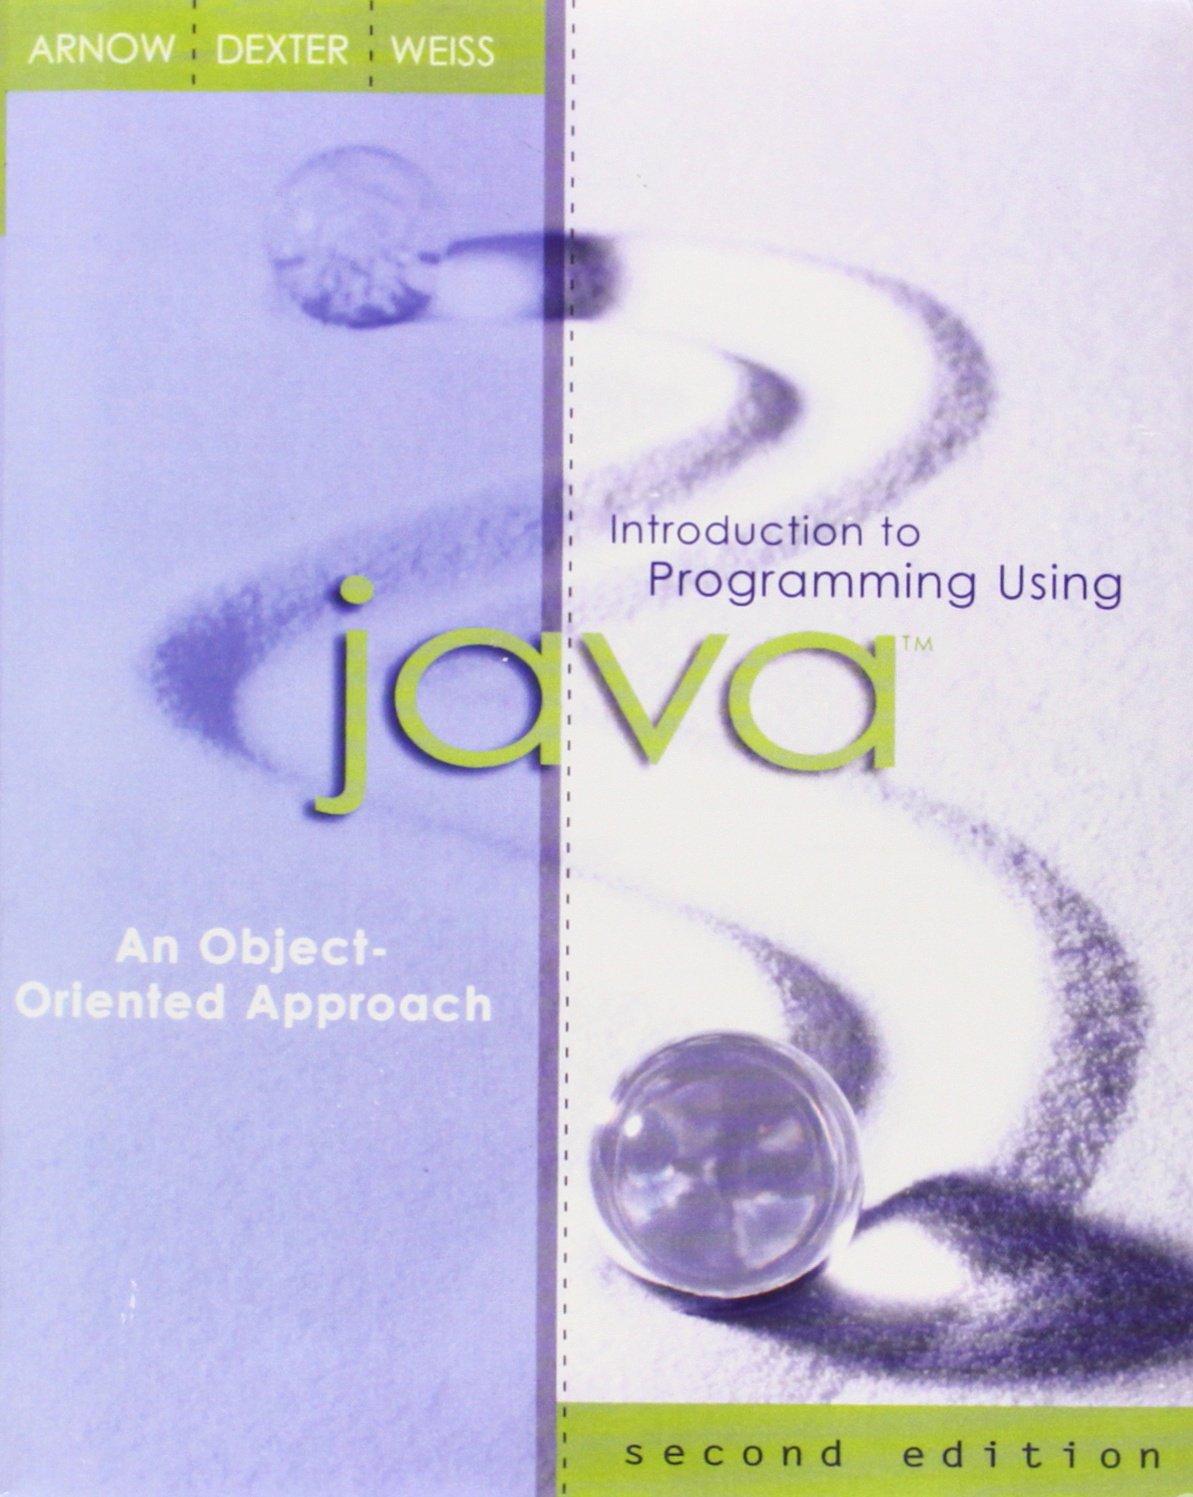 introduction to programming using java an object oriented approach 2nd edition david arnow, scott dexter,